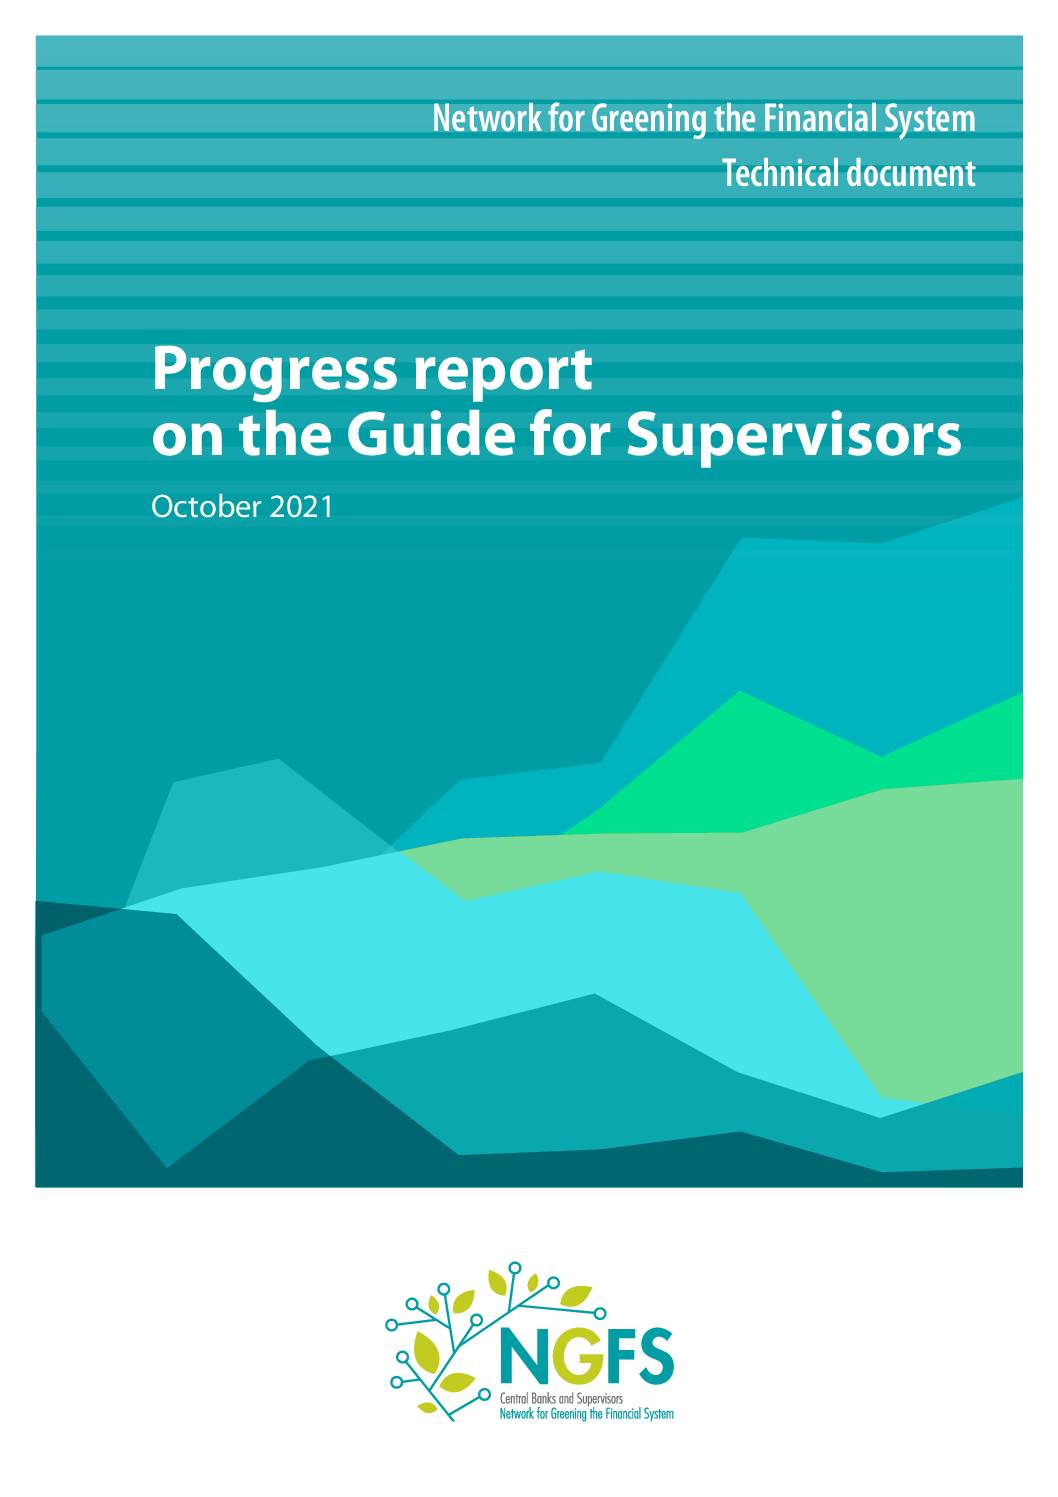 NGFS Publishes its Progress Report on the Implementation of the Recommendations of its Guide for Supervisors